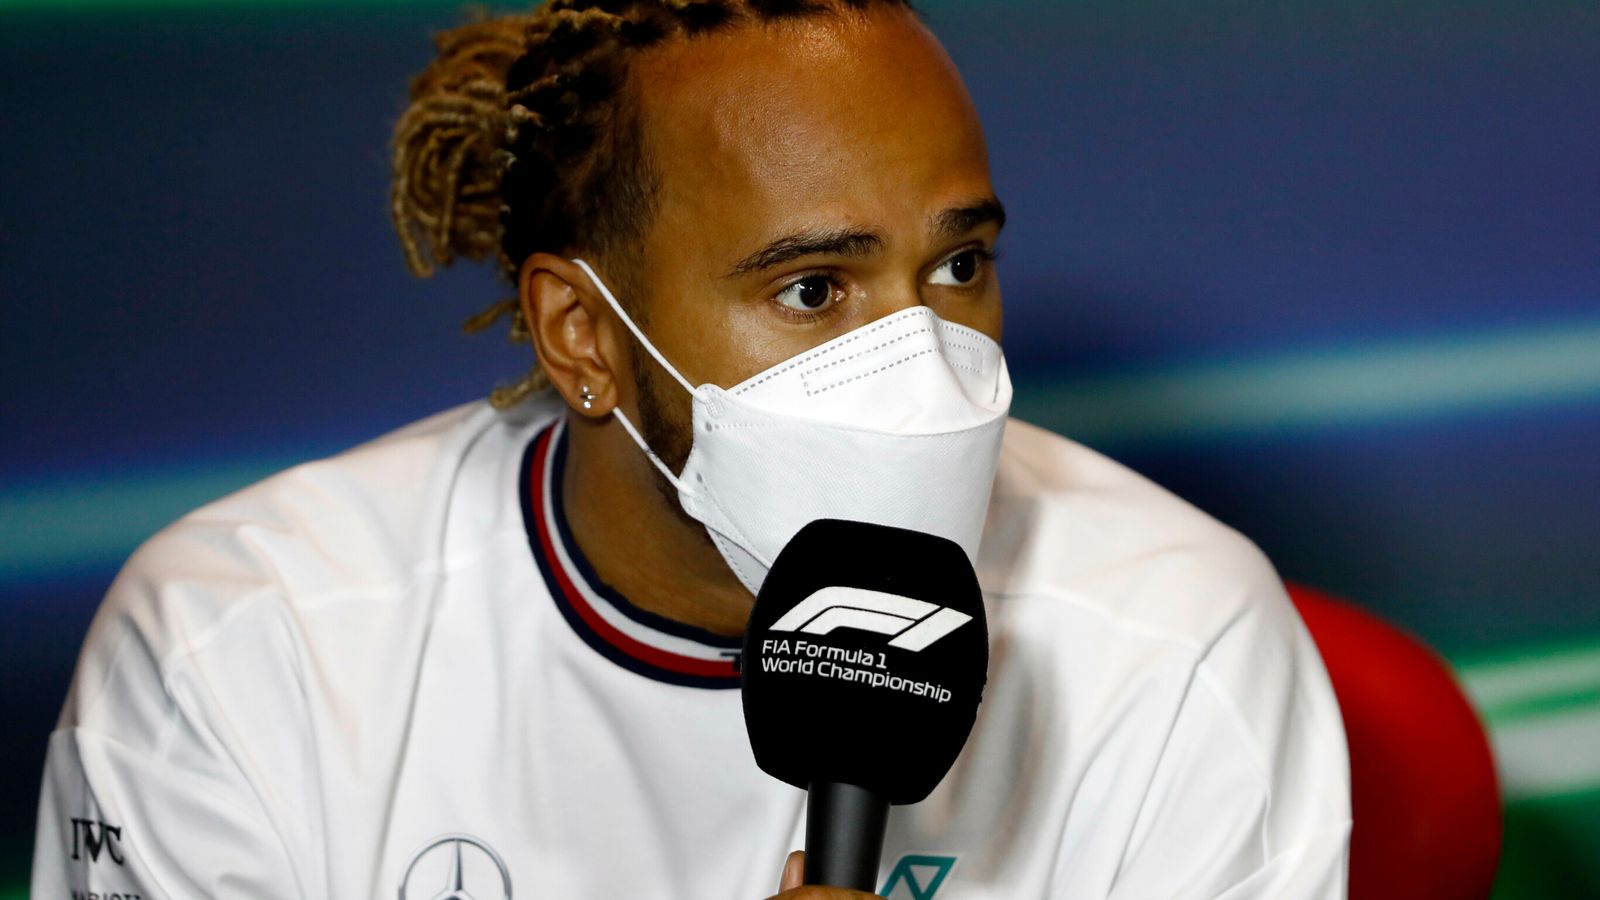 Lewis Hamilton defying Formula 1’s jewellery ban as he refuses to get earrings ‘chopped off’